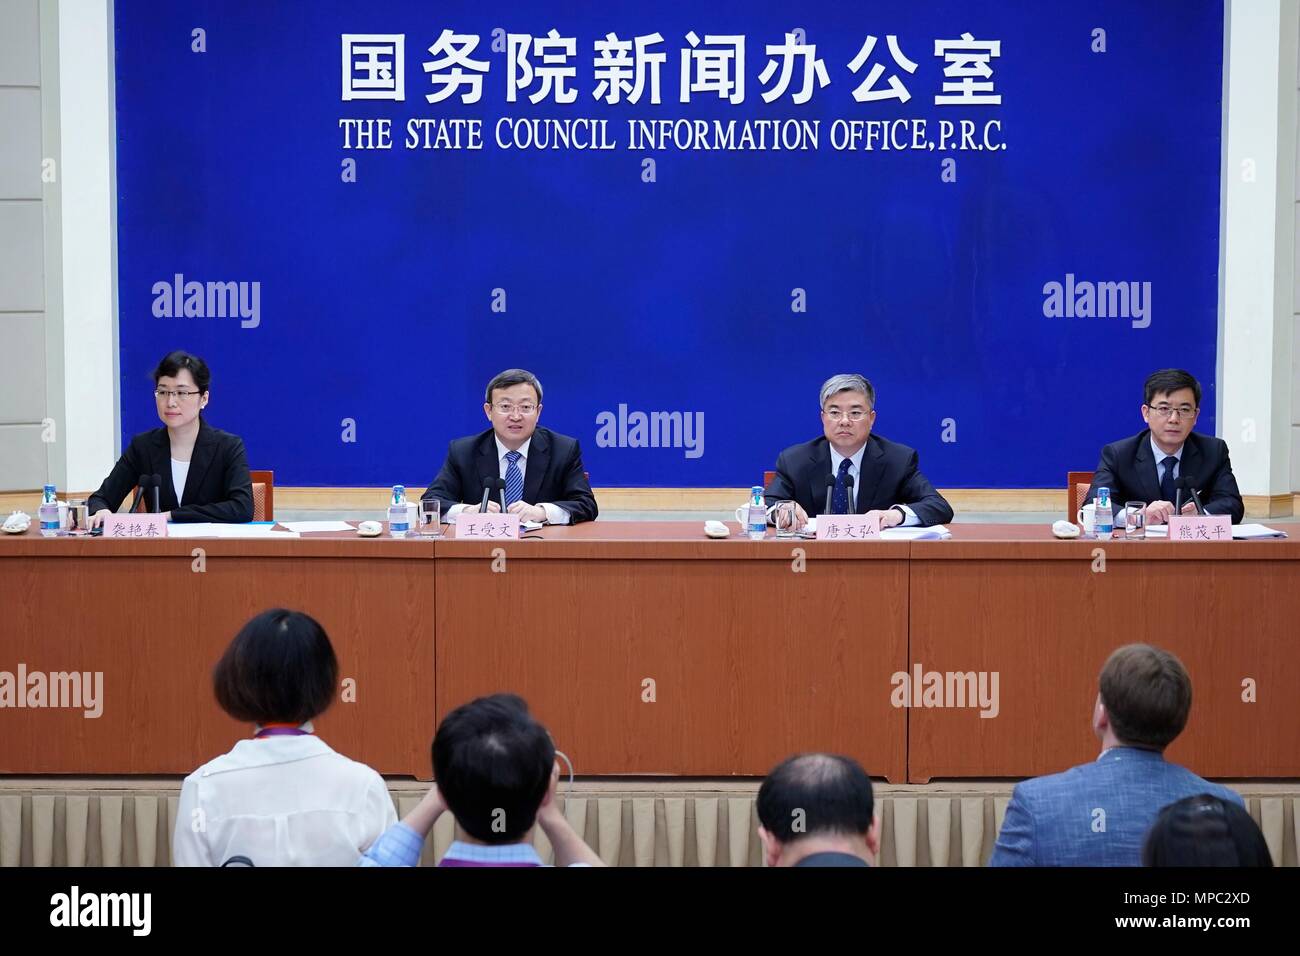 Beijing, China. 22nd May, 2018. A press conference of the State Council Information Office is held in Beijing, capital of China, May 22, 2018. China is quickening preparations for the introduction of new practices to cut red tape for business filing and registration of foreign-invested enterprises (FIEs) as part of efforts to attract more investment inflows, authorities said Tuesday. Credit: Shen Bohan/Xinhua/Alamy Live News Stock Photo